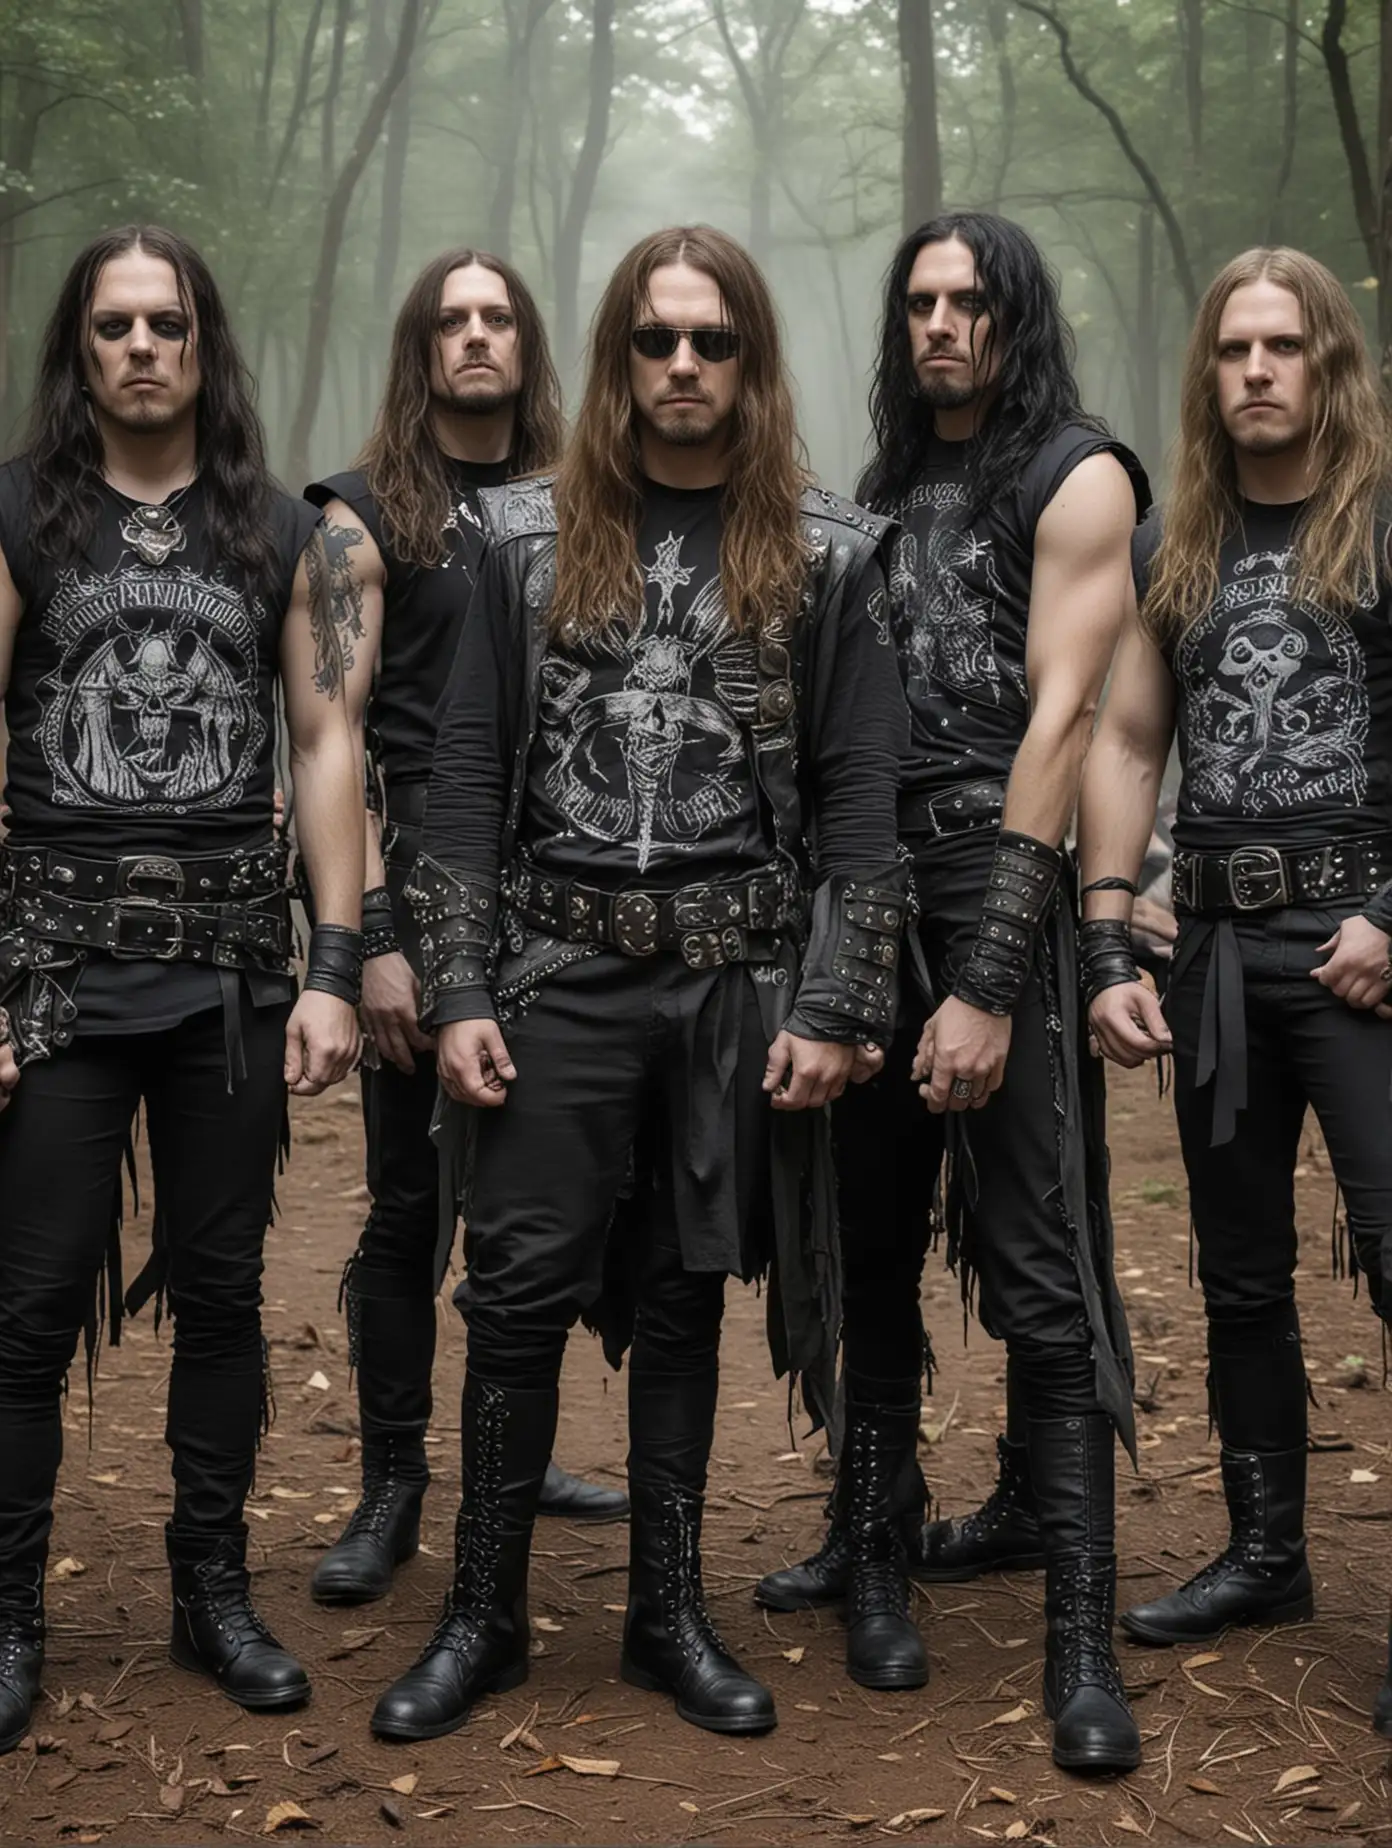 Epic Metal Bands Touring as Conquerors